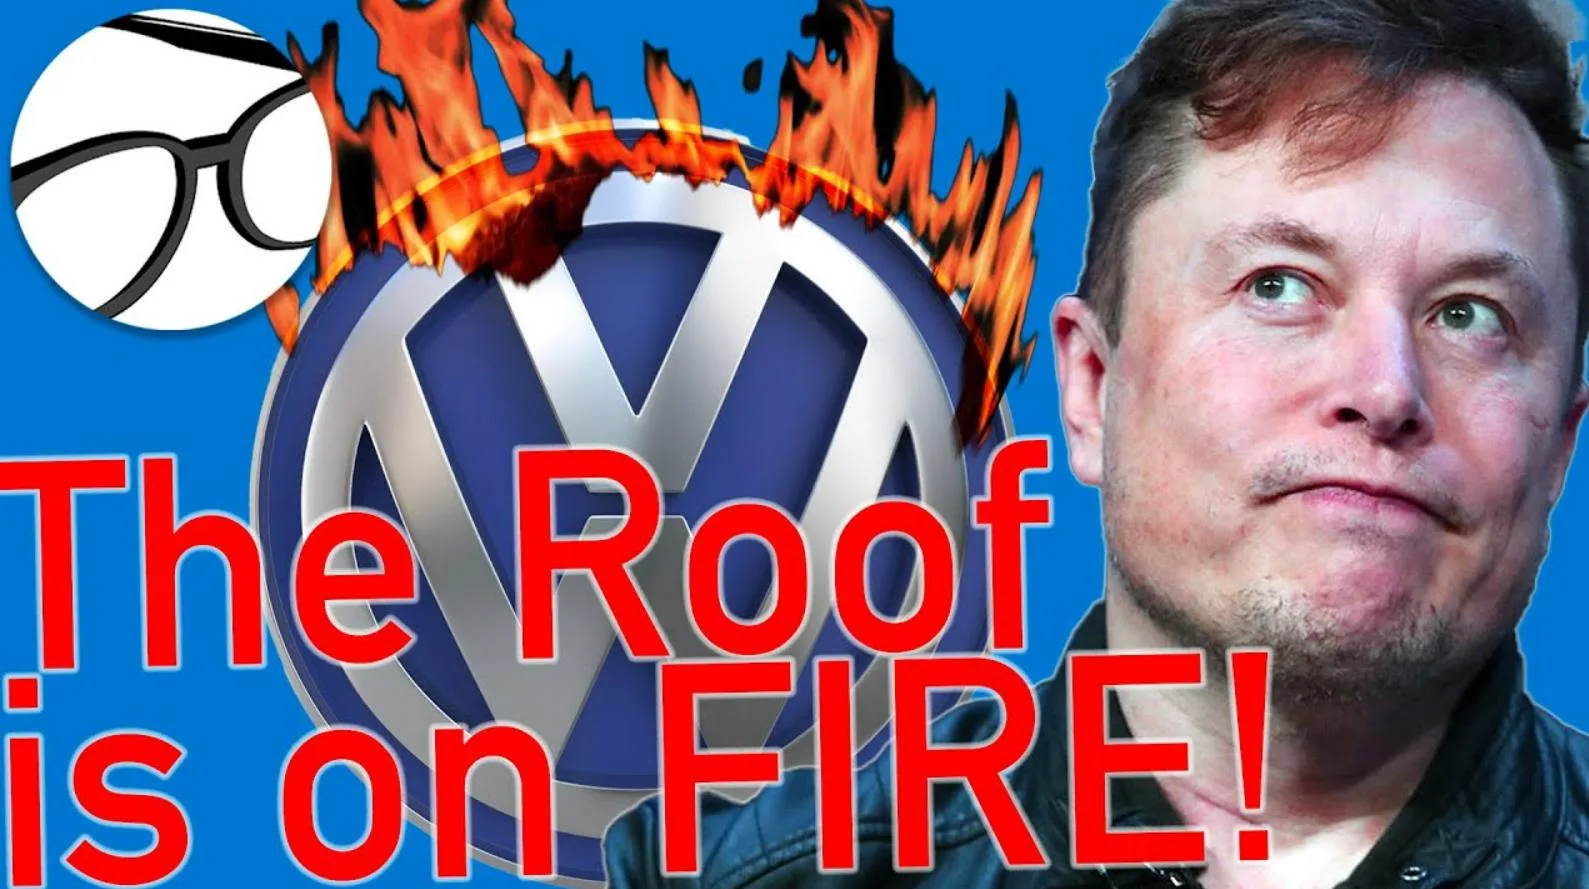 vw the roof is on fire, vw collaps, probleme vw, vw id china, autolatest, drive test, colaps vw grup